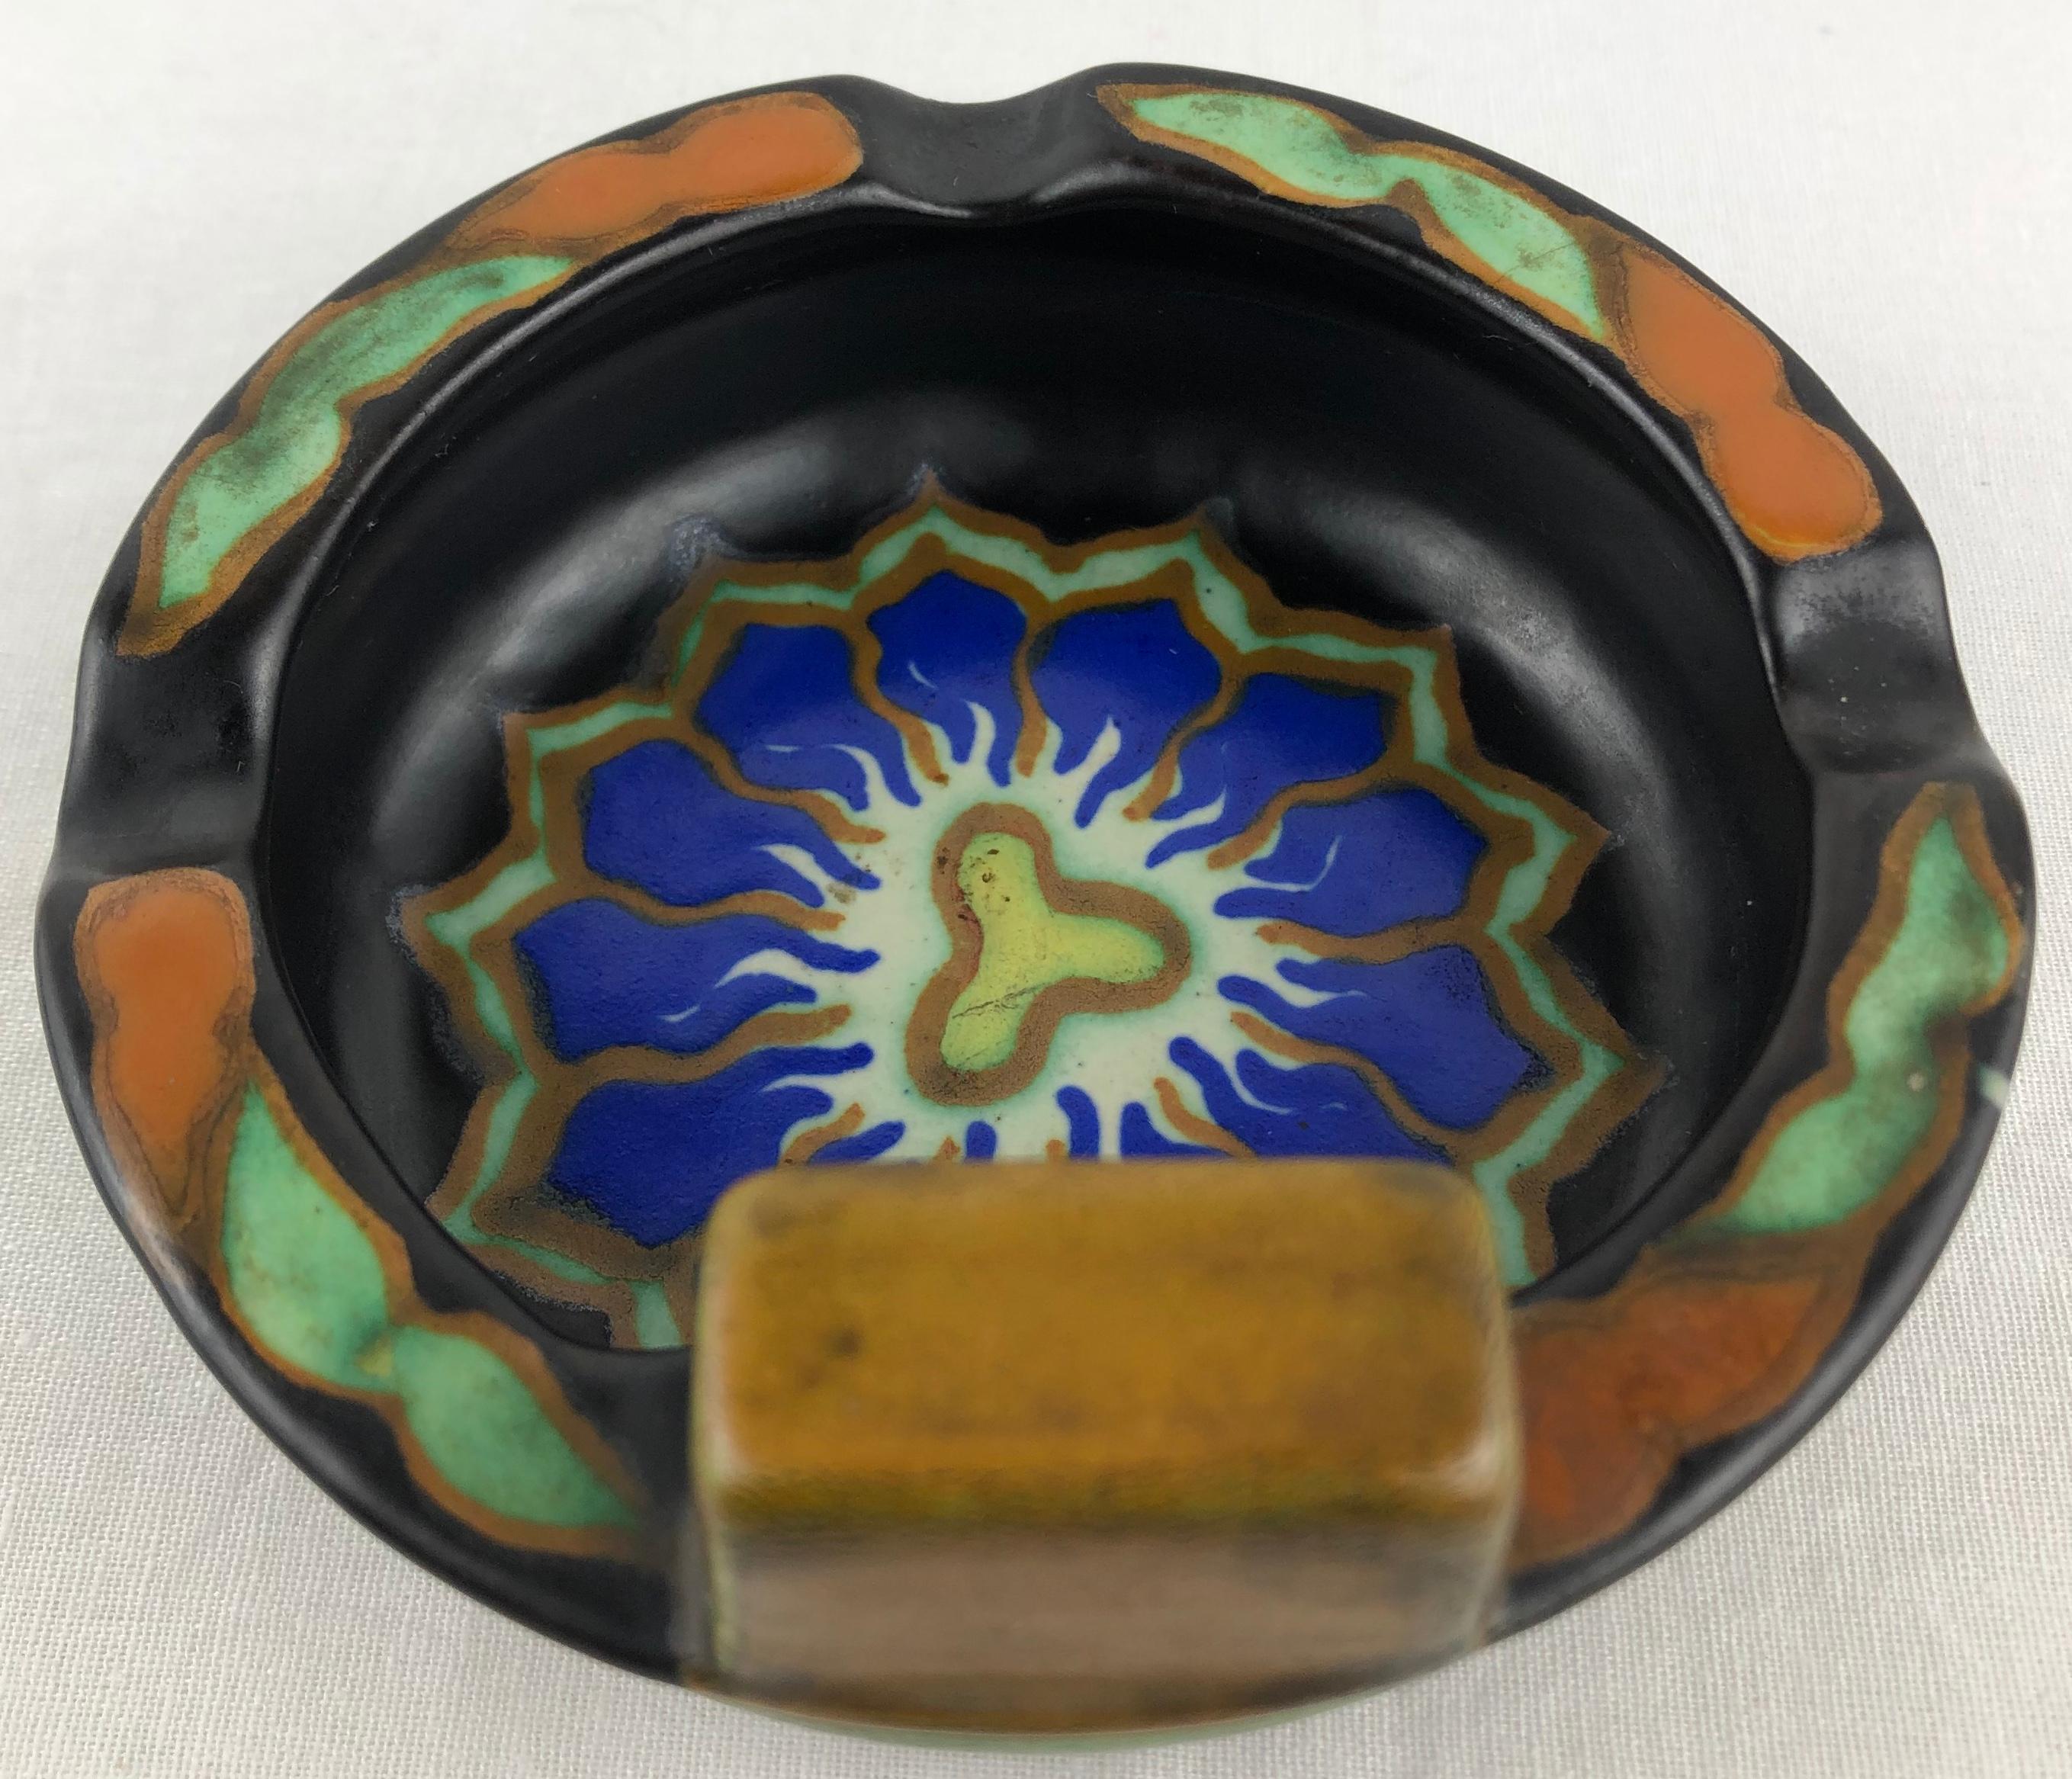 A beautiful Art Nouveau Gouda pottery ashtray.
Wonderfully colorful floral hand painted design, from Holland.
This well made decorative object can also be used as a key holder/vide poche.

Signed Dalia Konin Klyk, Coedewaalem, Gouda, Holland and